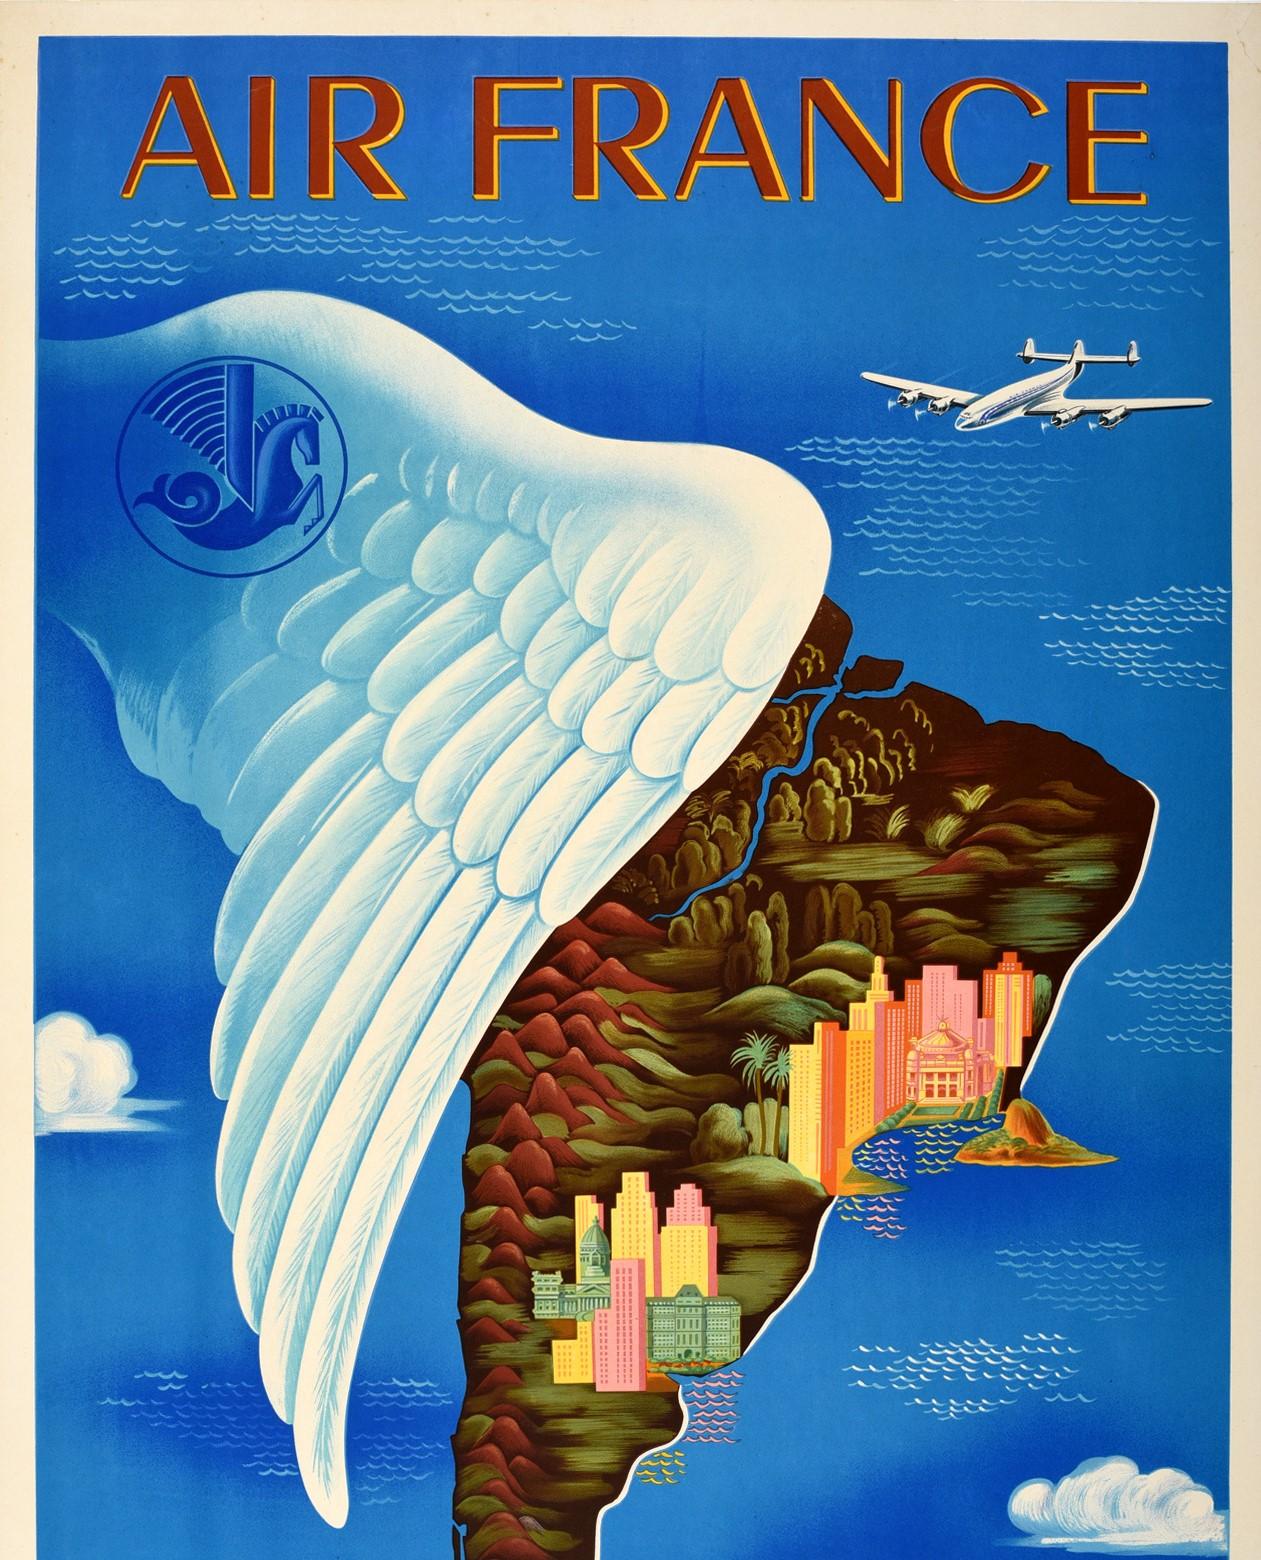 Original vintage travel poster advertising flights to South America / America Del Sur by Air France featuring a colourful stylised design by Lucien Boucher (1889-1971) depicting historic buildings and city skyscrapers, jungle forests, palm trees,